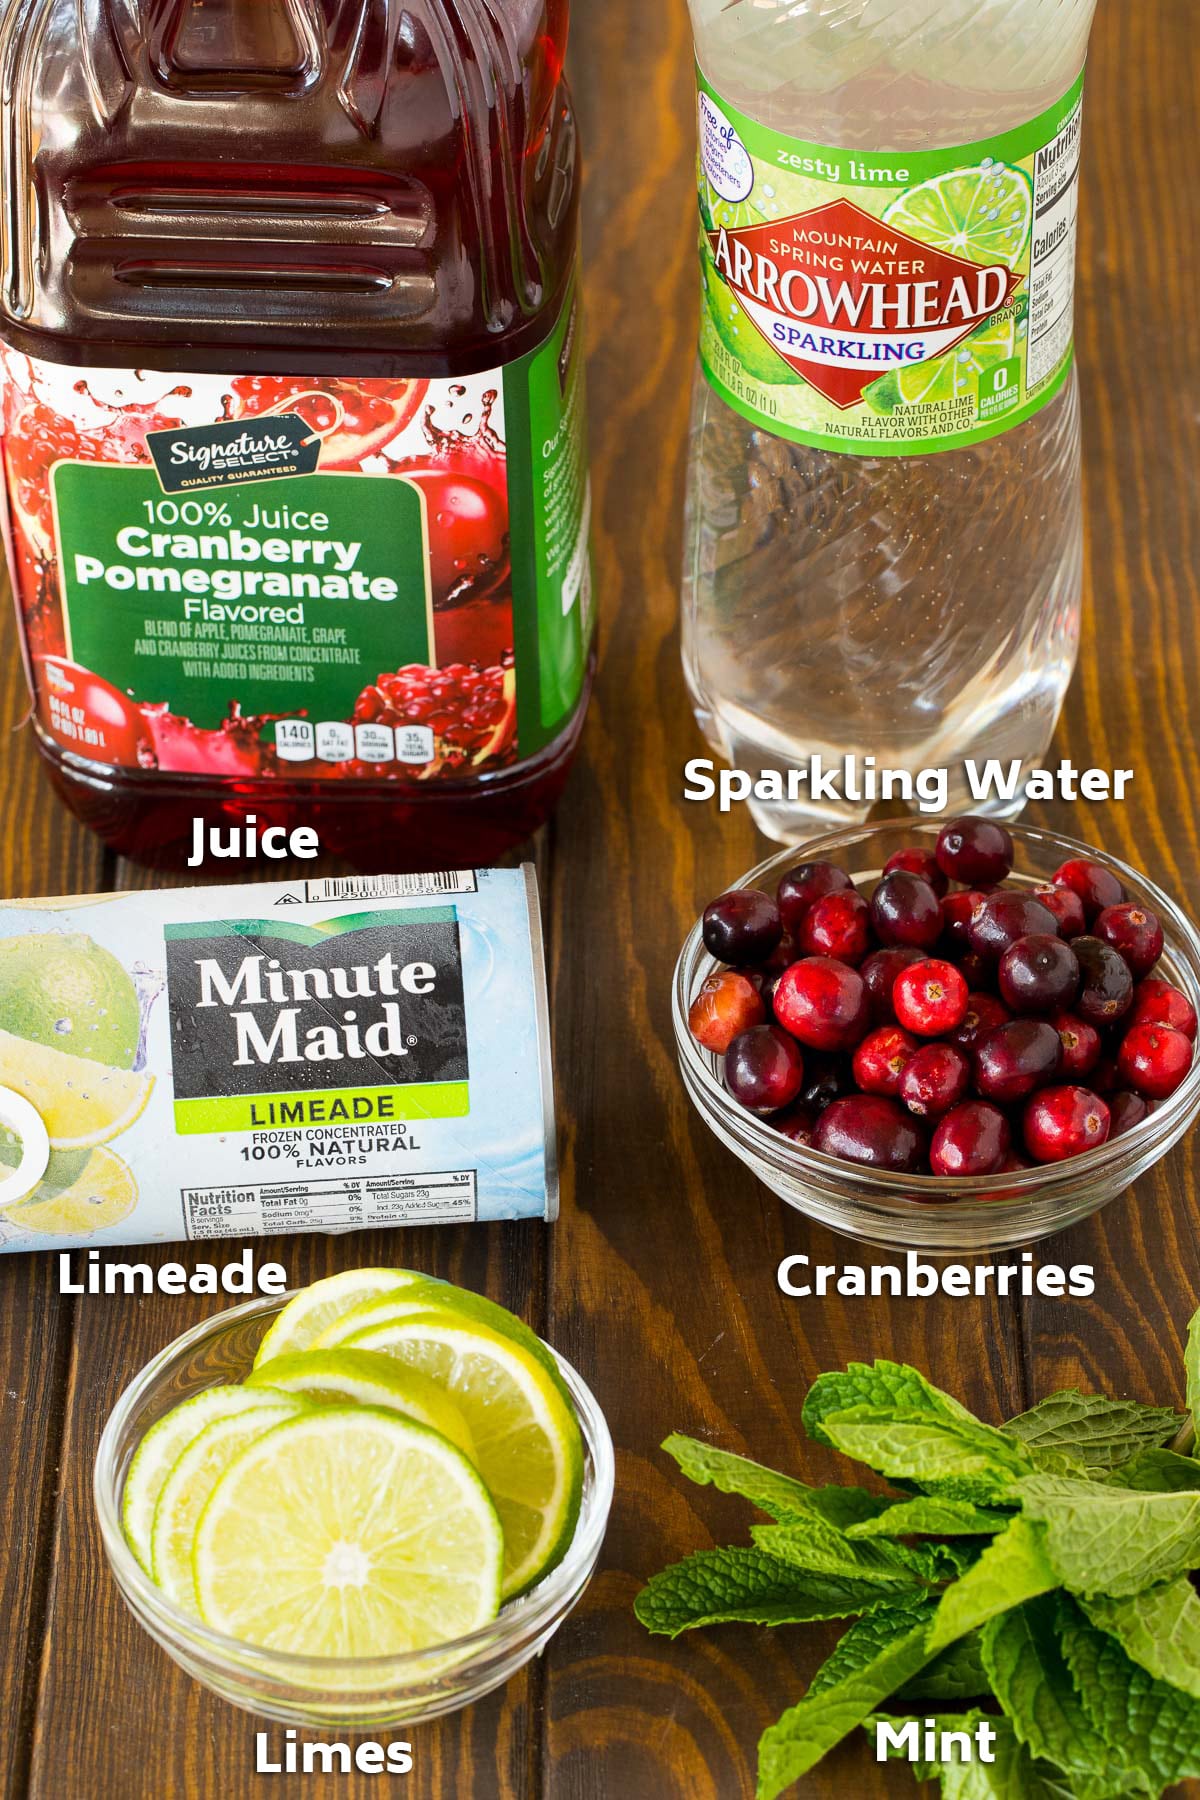 Ingredients including limes, mint, cranberries, juice and sparkling water.